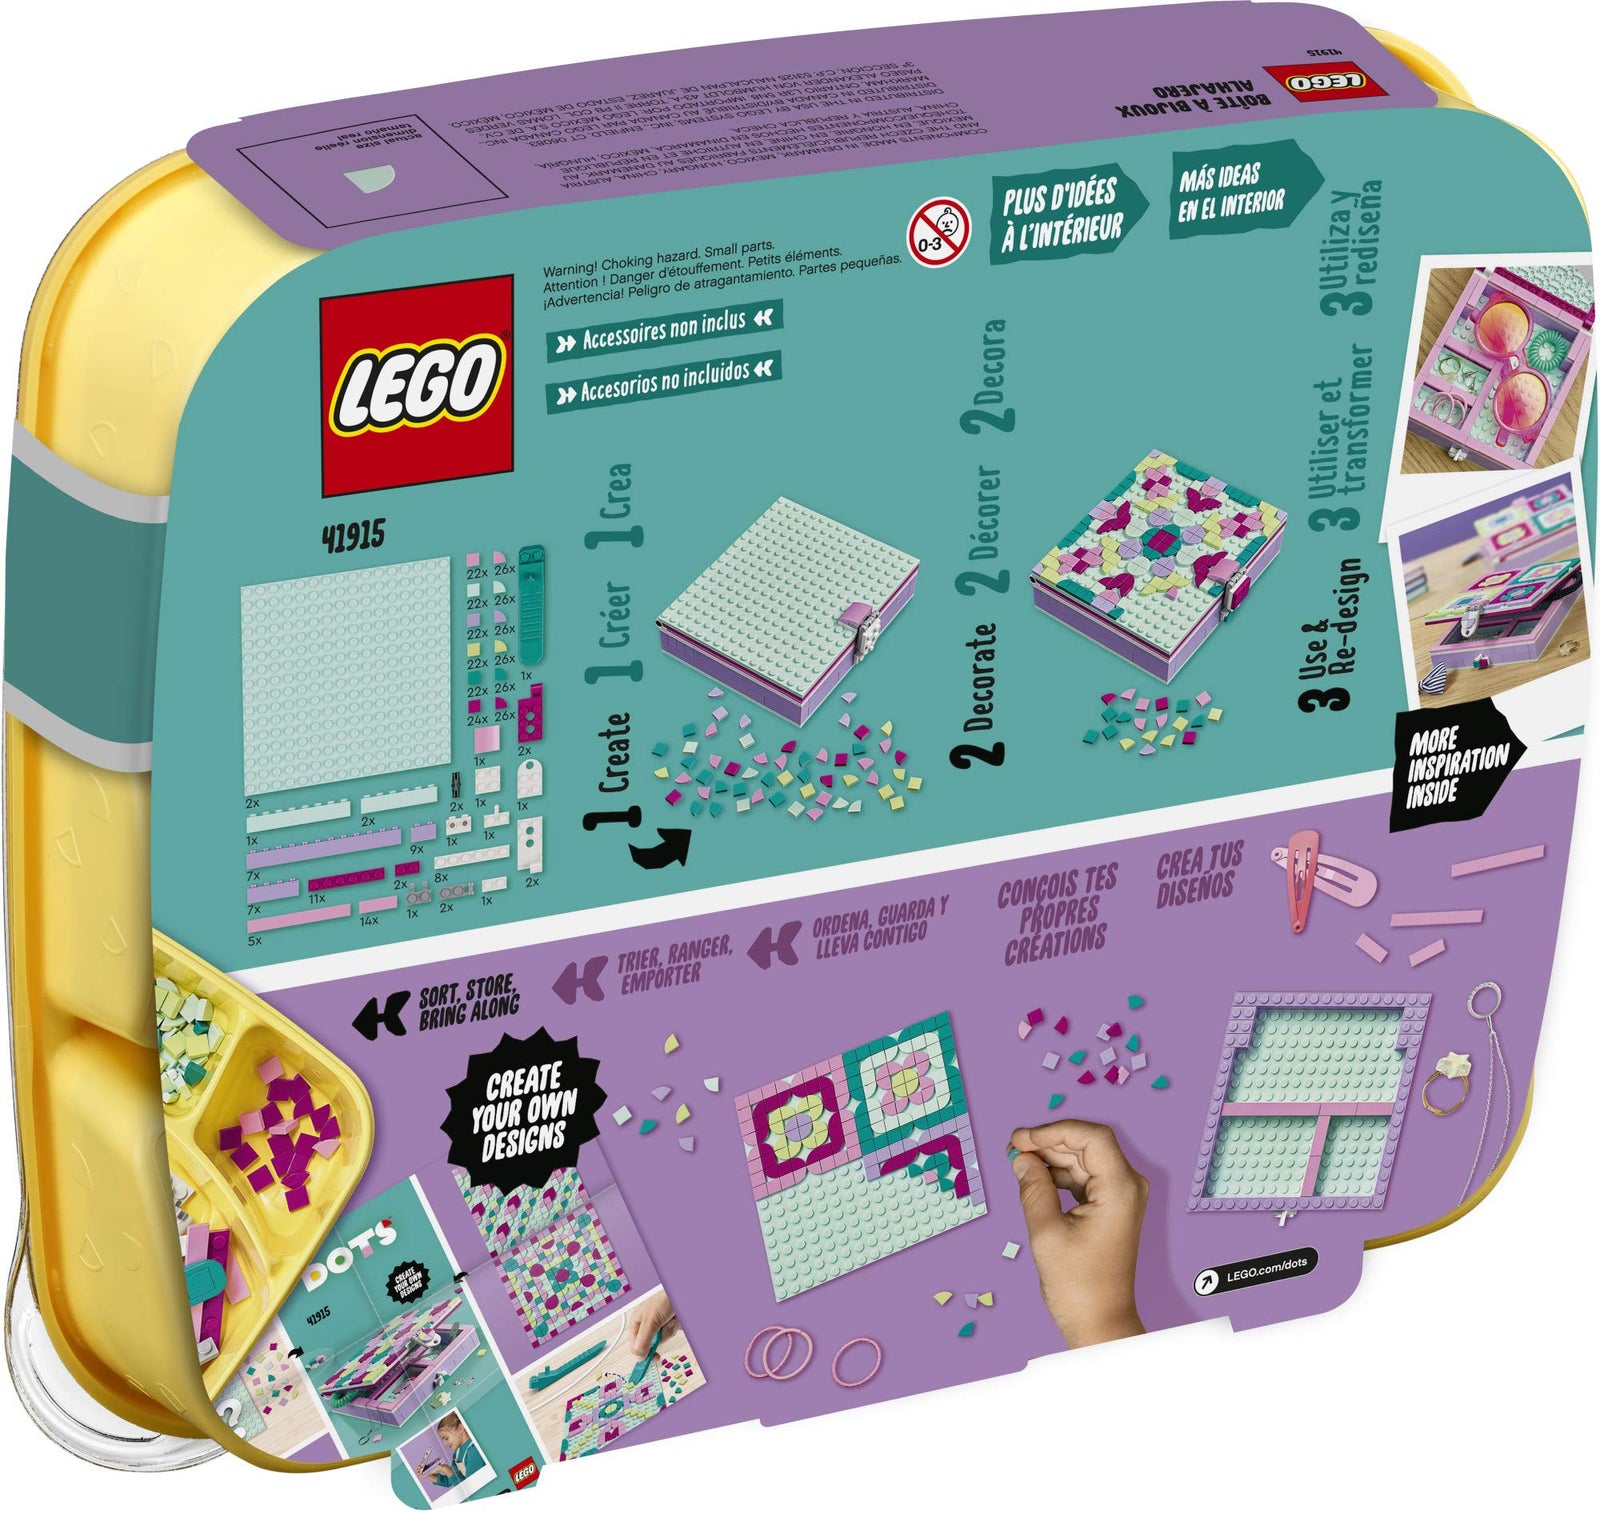 LEGO DOTS Jewelry Box 41915 Craft Decorations Art Kit, for Kids Who are Into Cool Arts and Crafts, A Great Entrance into Unique Arts and Crafts Toys for Kids (374 Pieces)